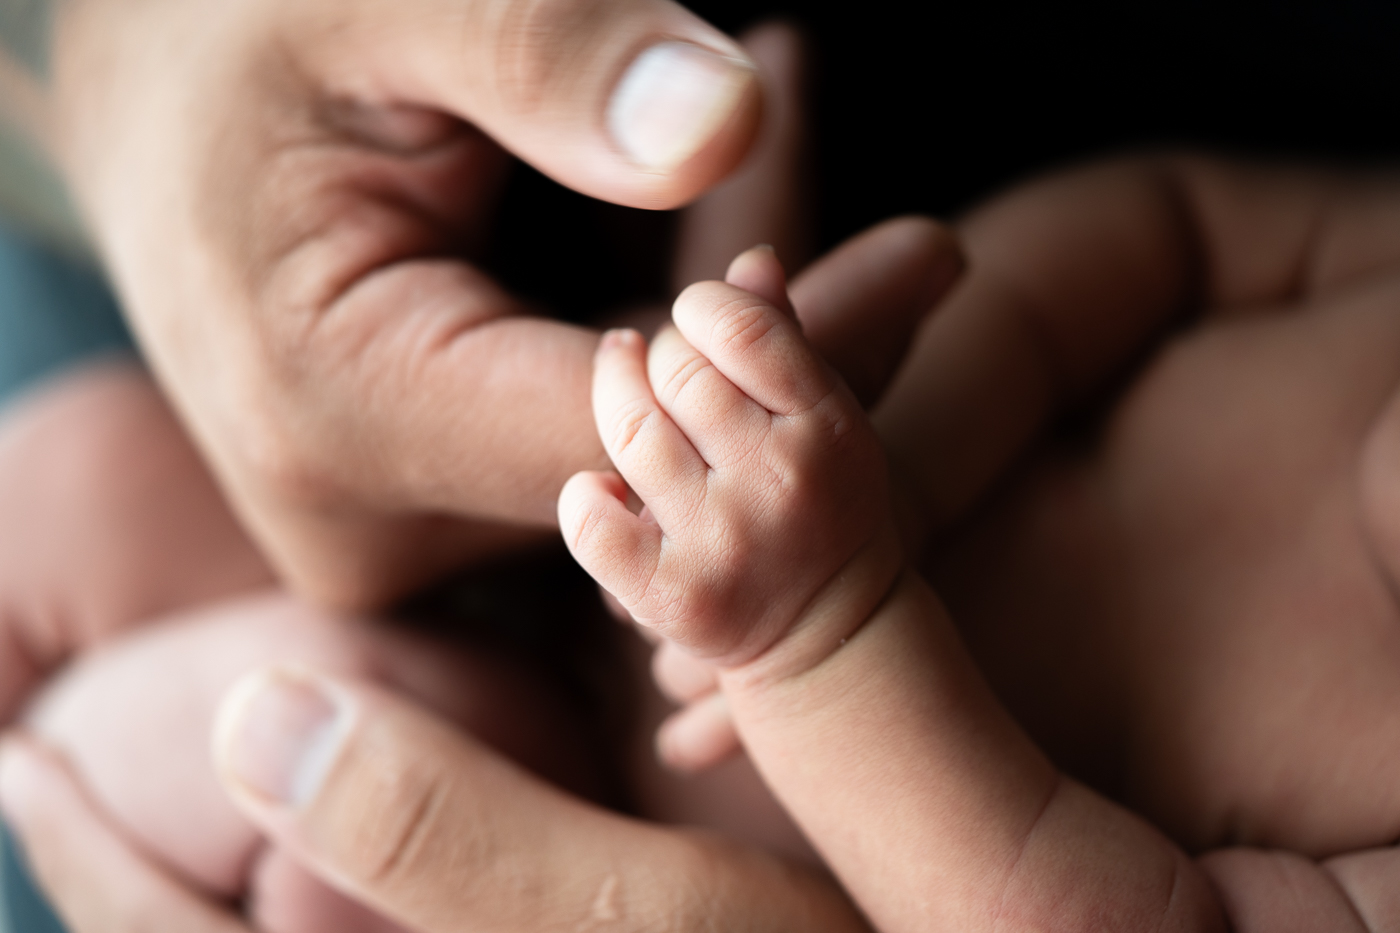 Close-up image of a baby's hand wrapped around her father's finger. The baby's hand is small and delicate, and the father's finger is large and strong. The image conveys a sense of love, protection, and bonding.